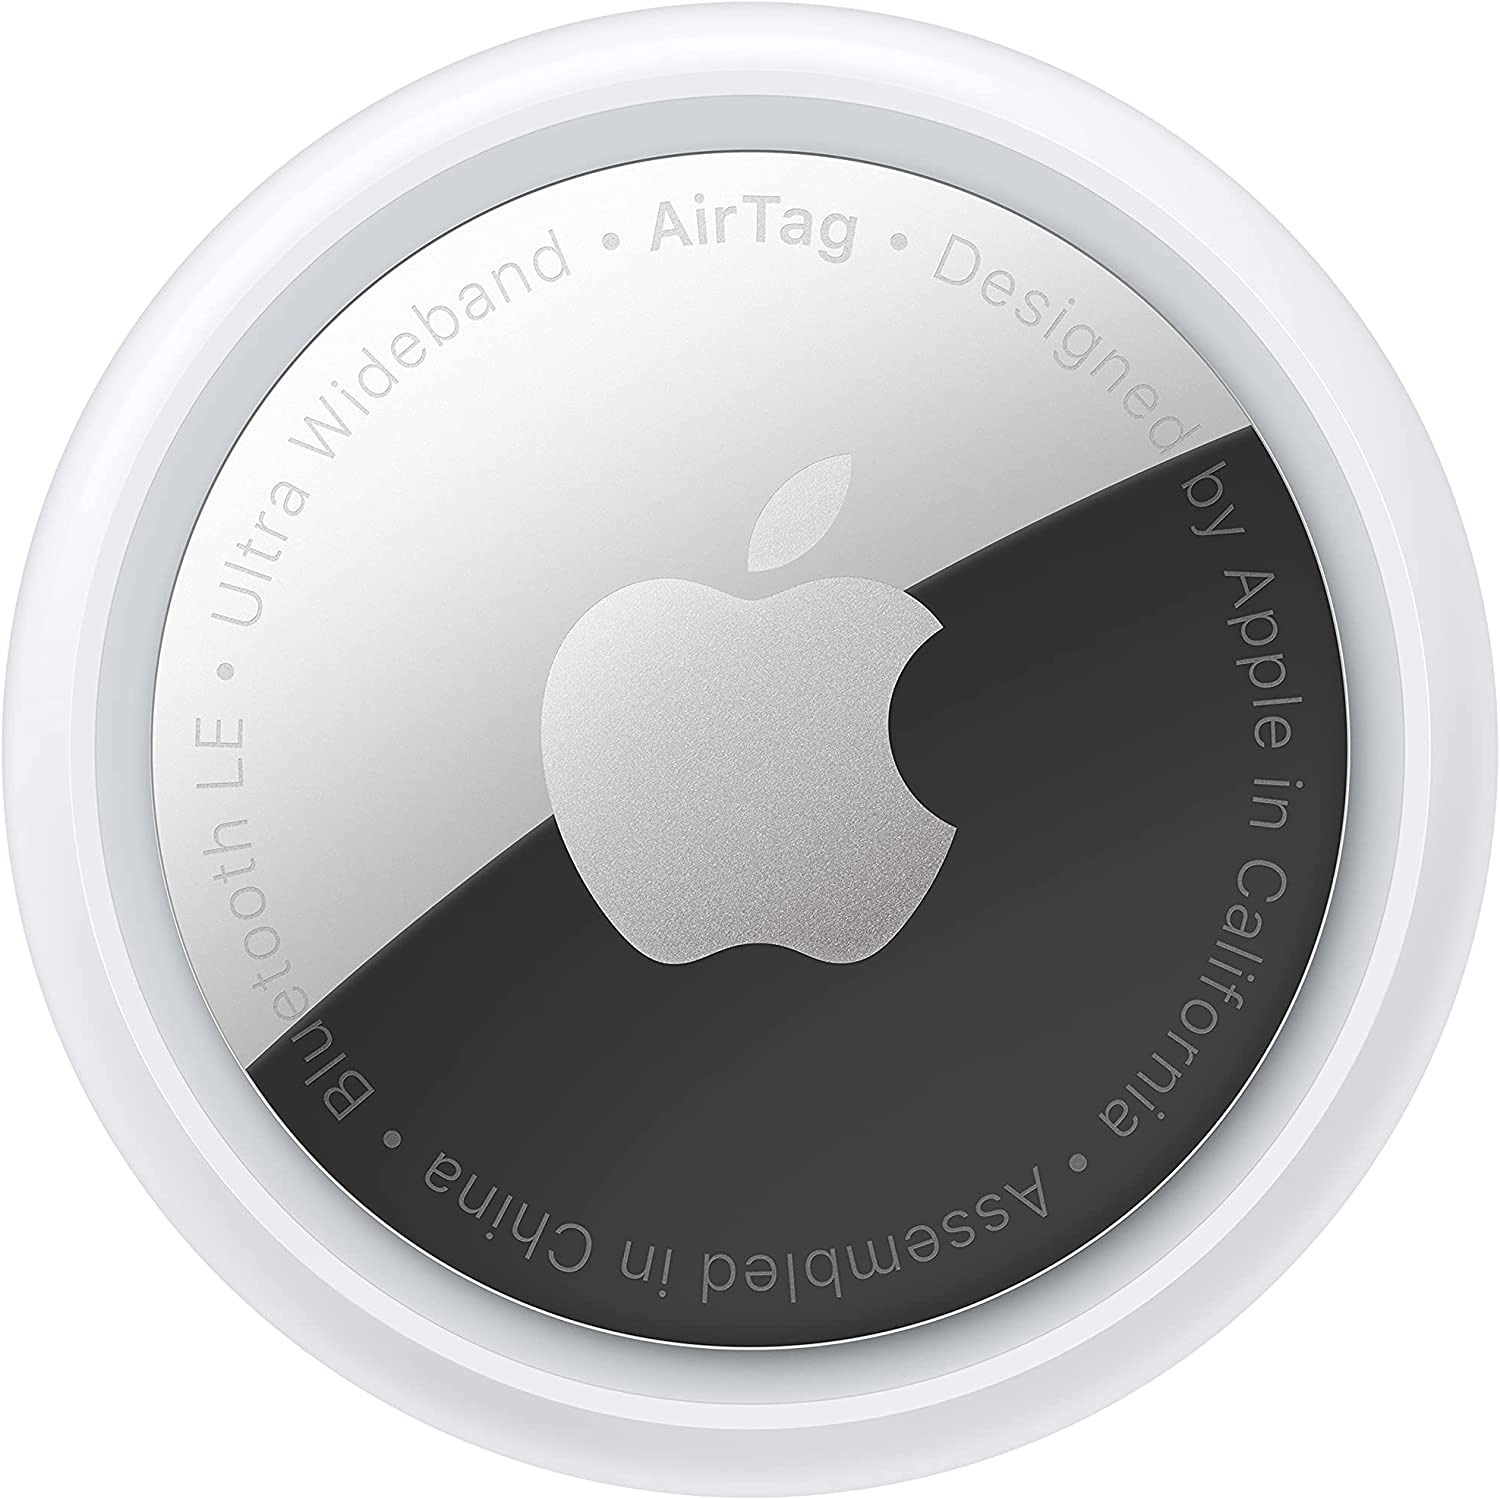 A picture of a round Apple air tag (a tracking device). Its great for tracking luggage.